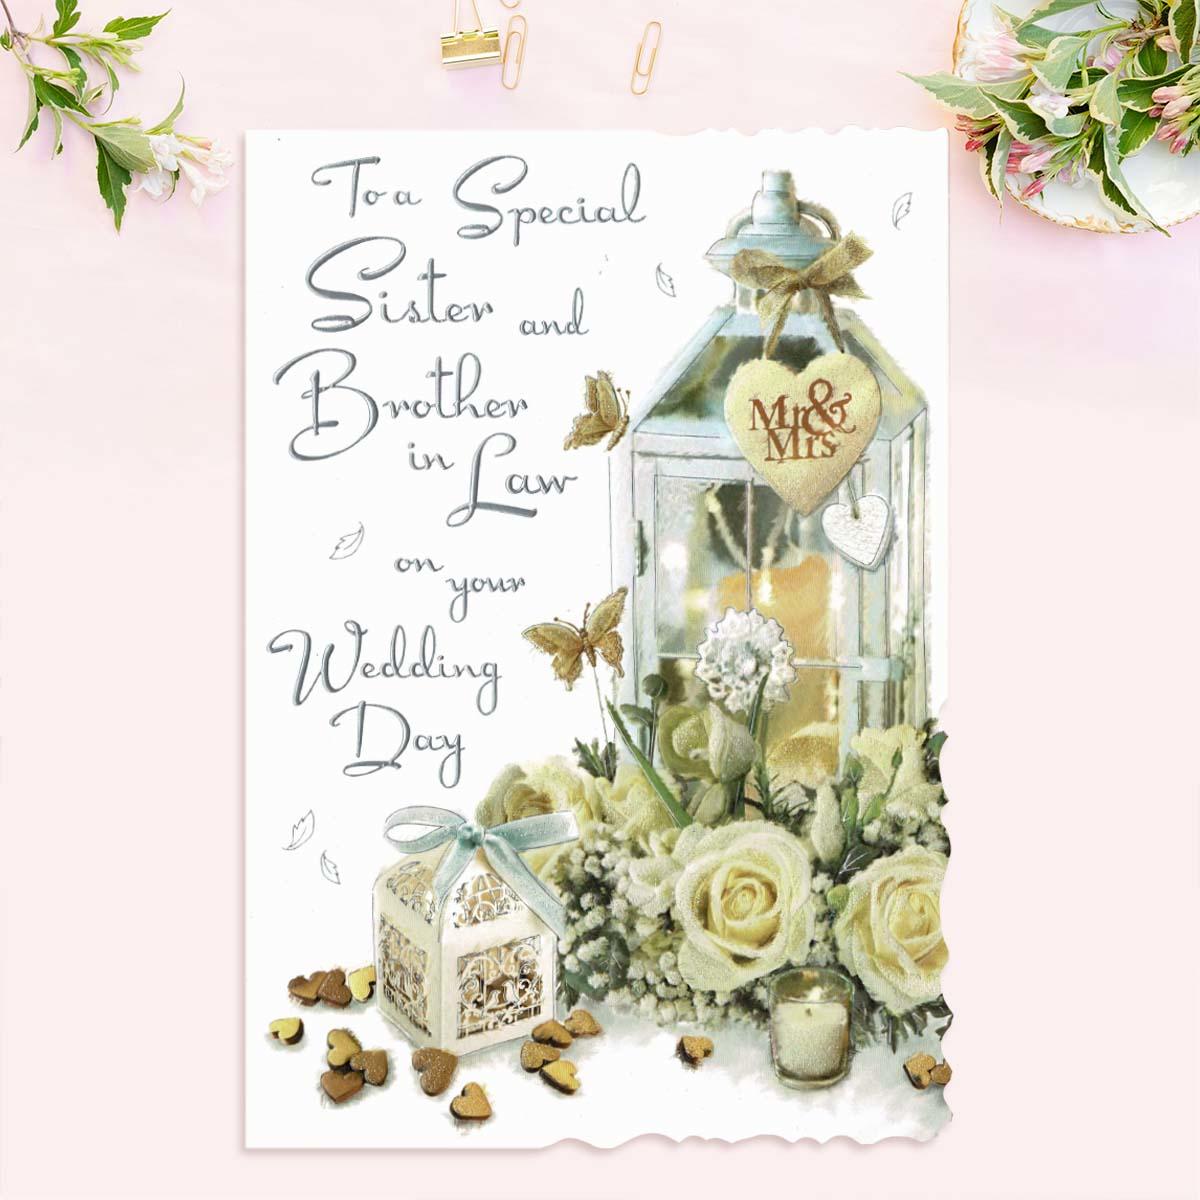 Special Sister & Brother In Law Wedding Day Card Front Image